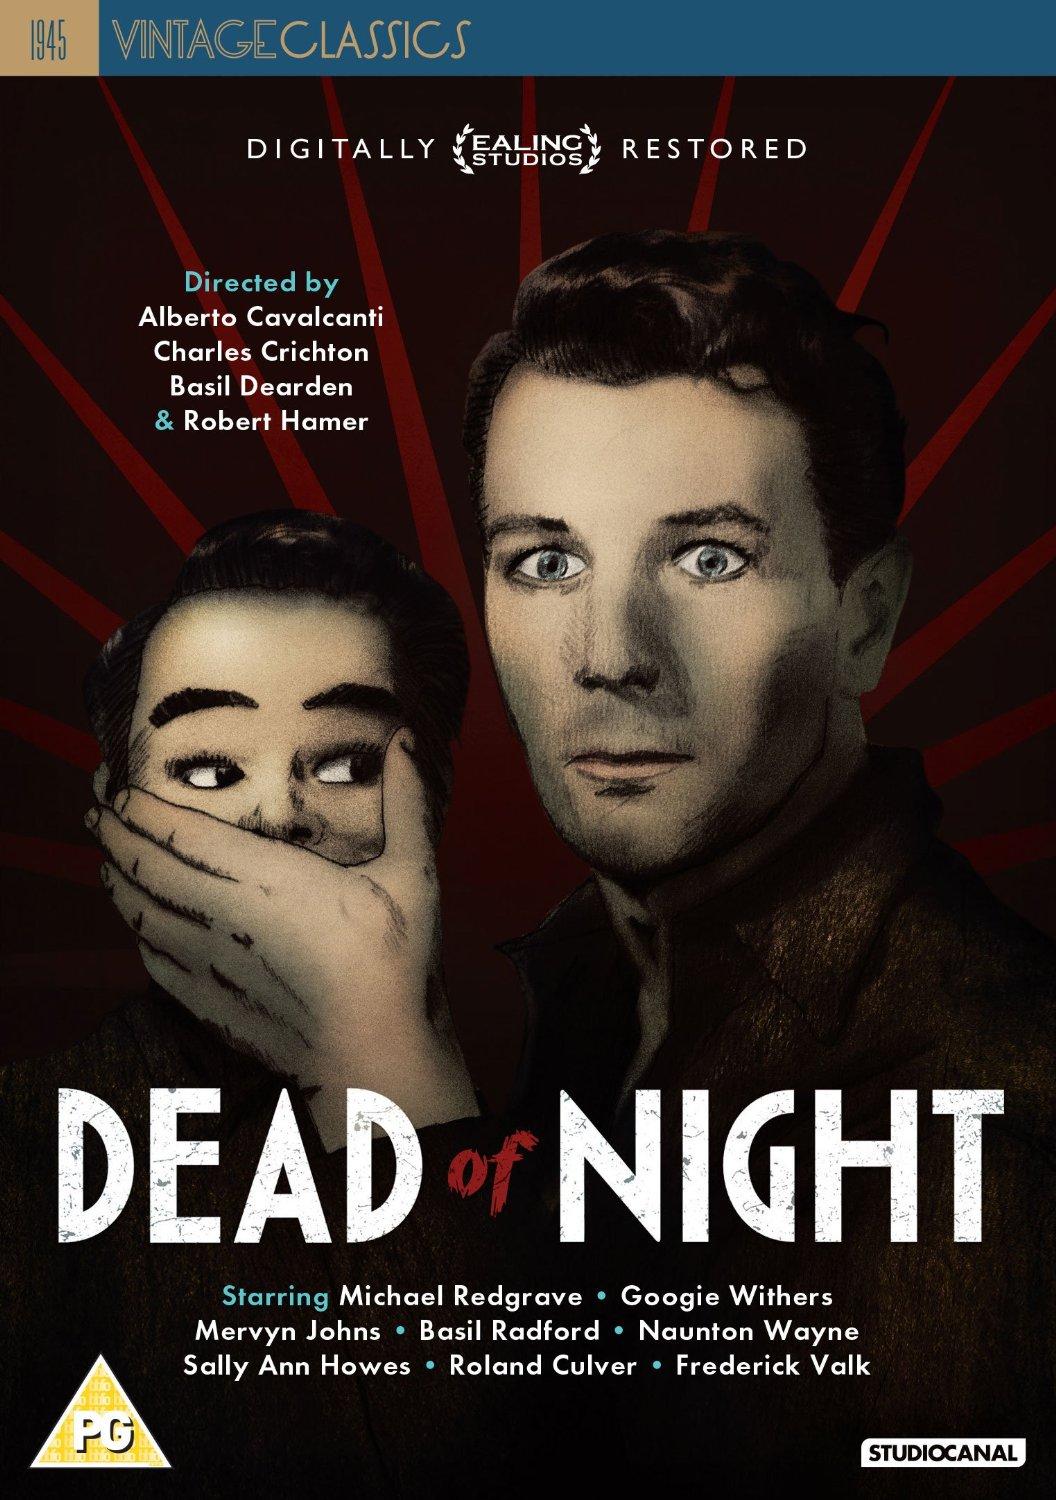 Dead of Night DVD from Studio Canal and Vintage Classics